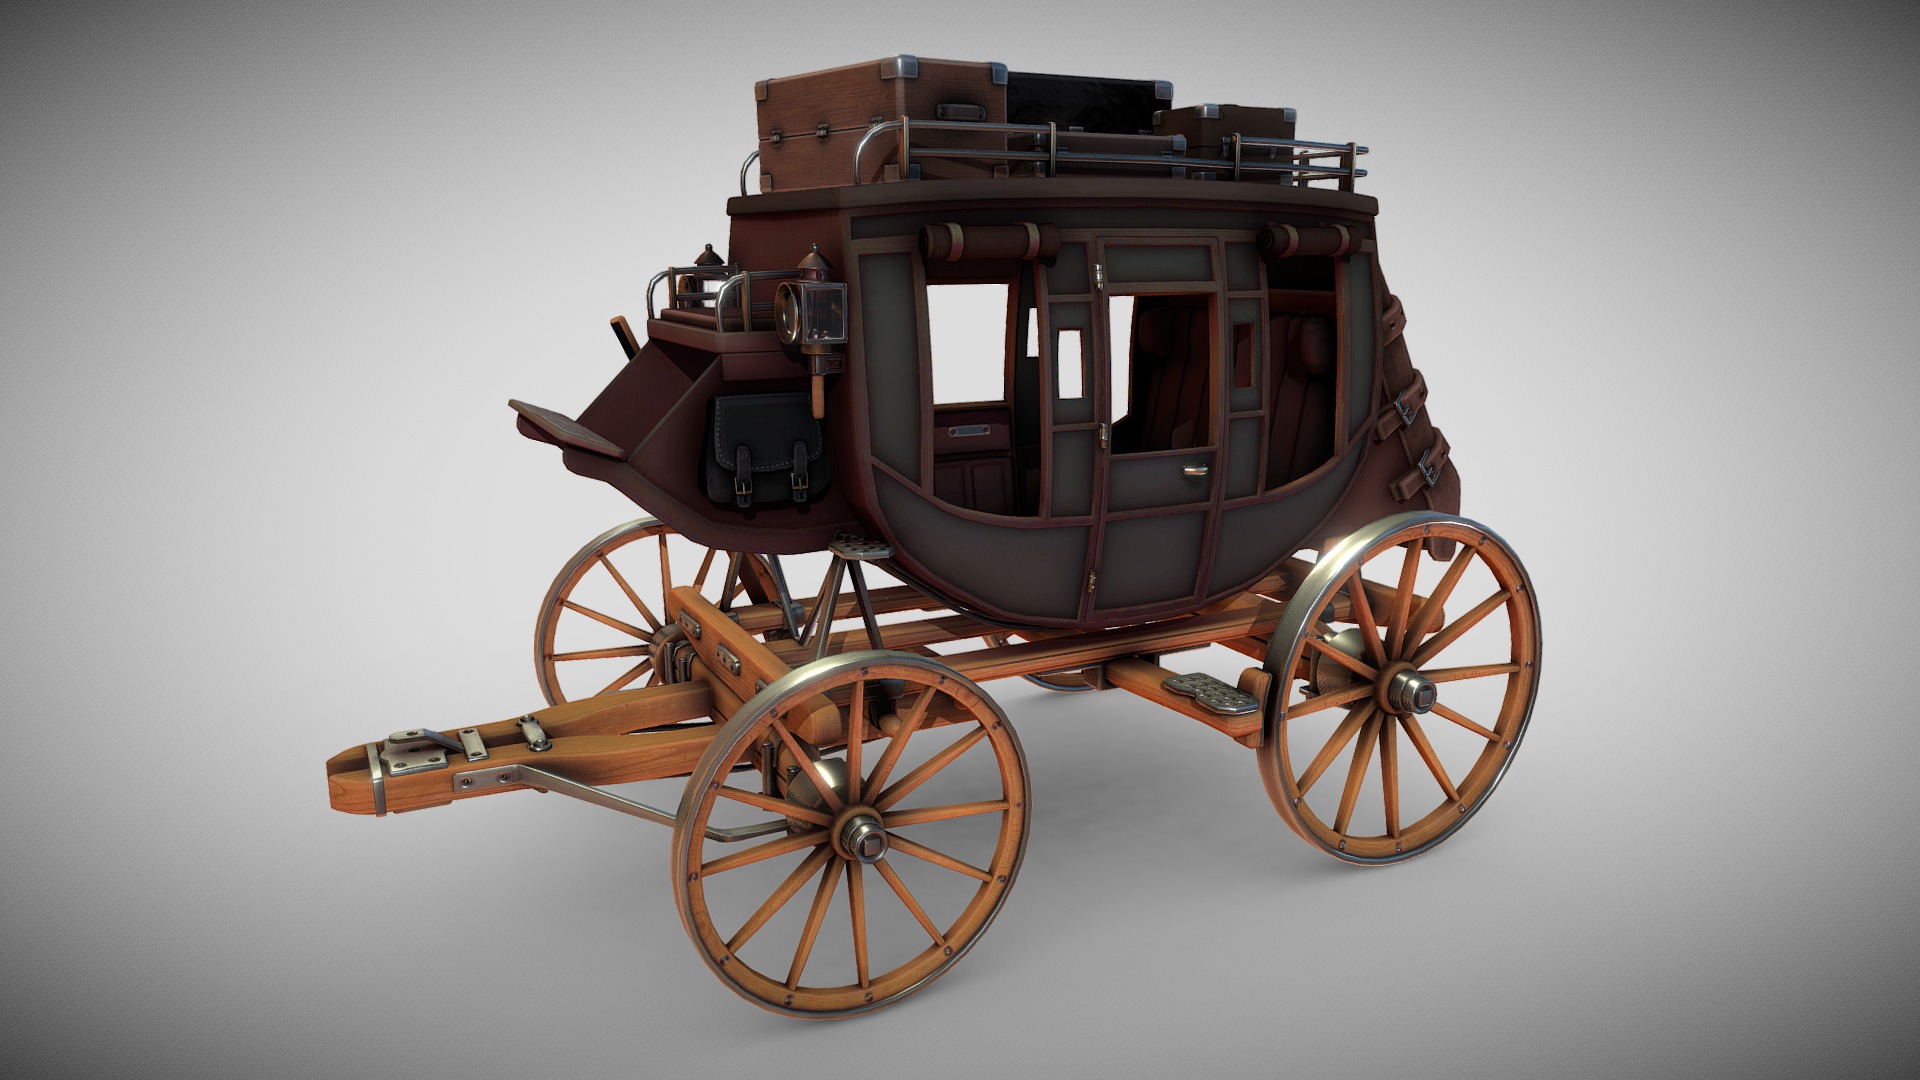 3D model Stagecoach - This is a 3D model of the Stagecoach. The 3D model is about a small wooden carriage.